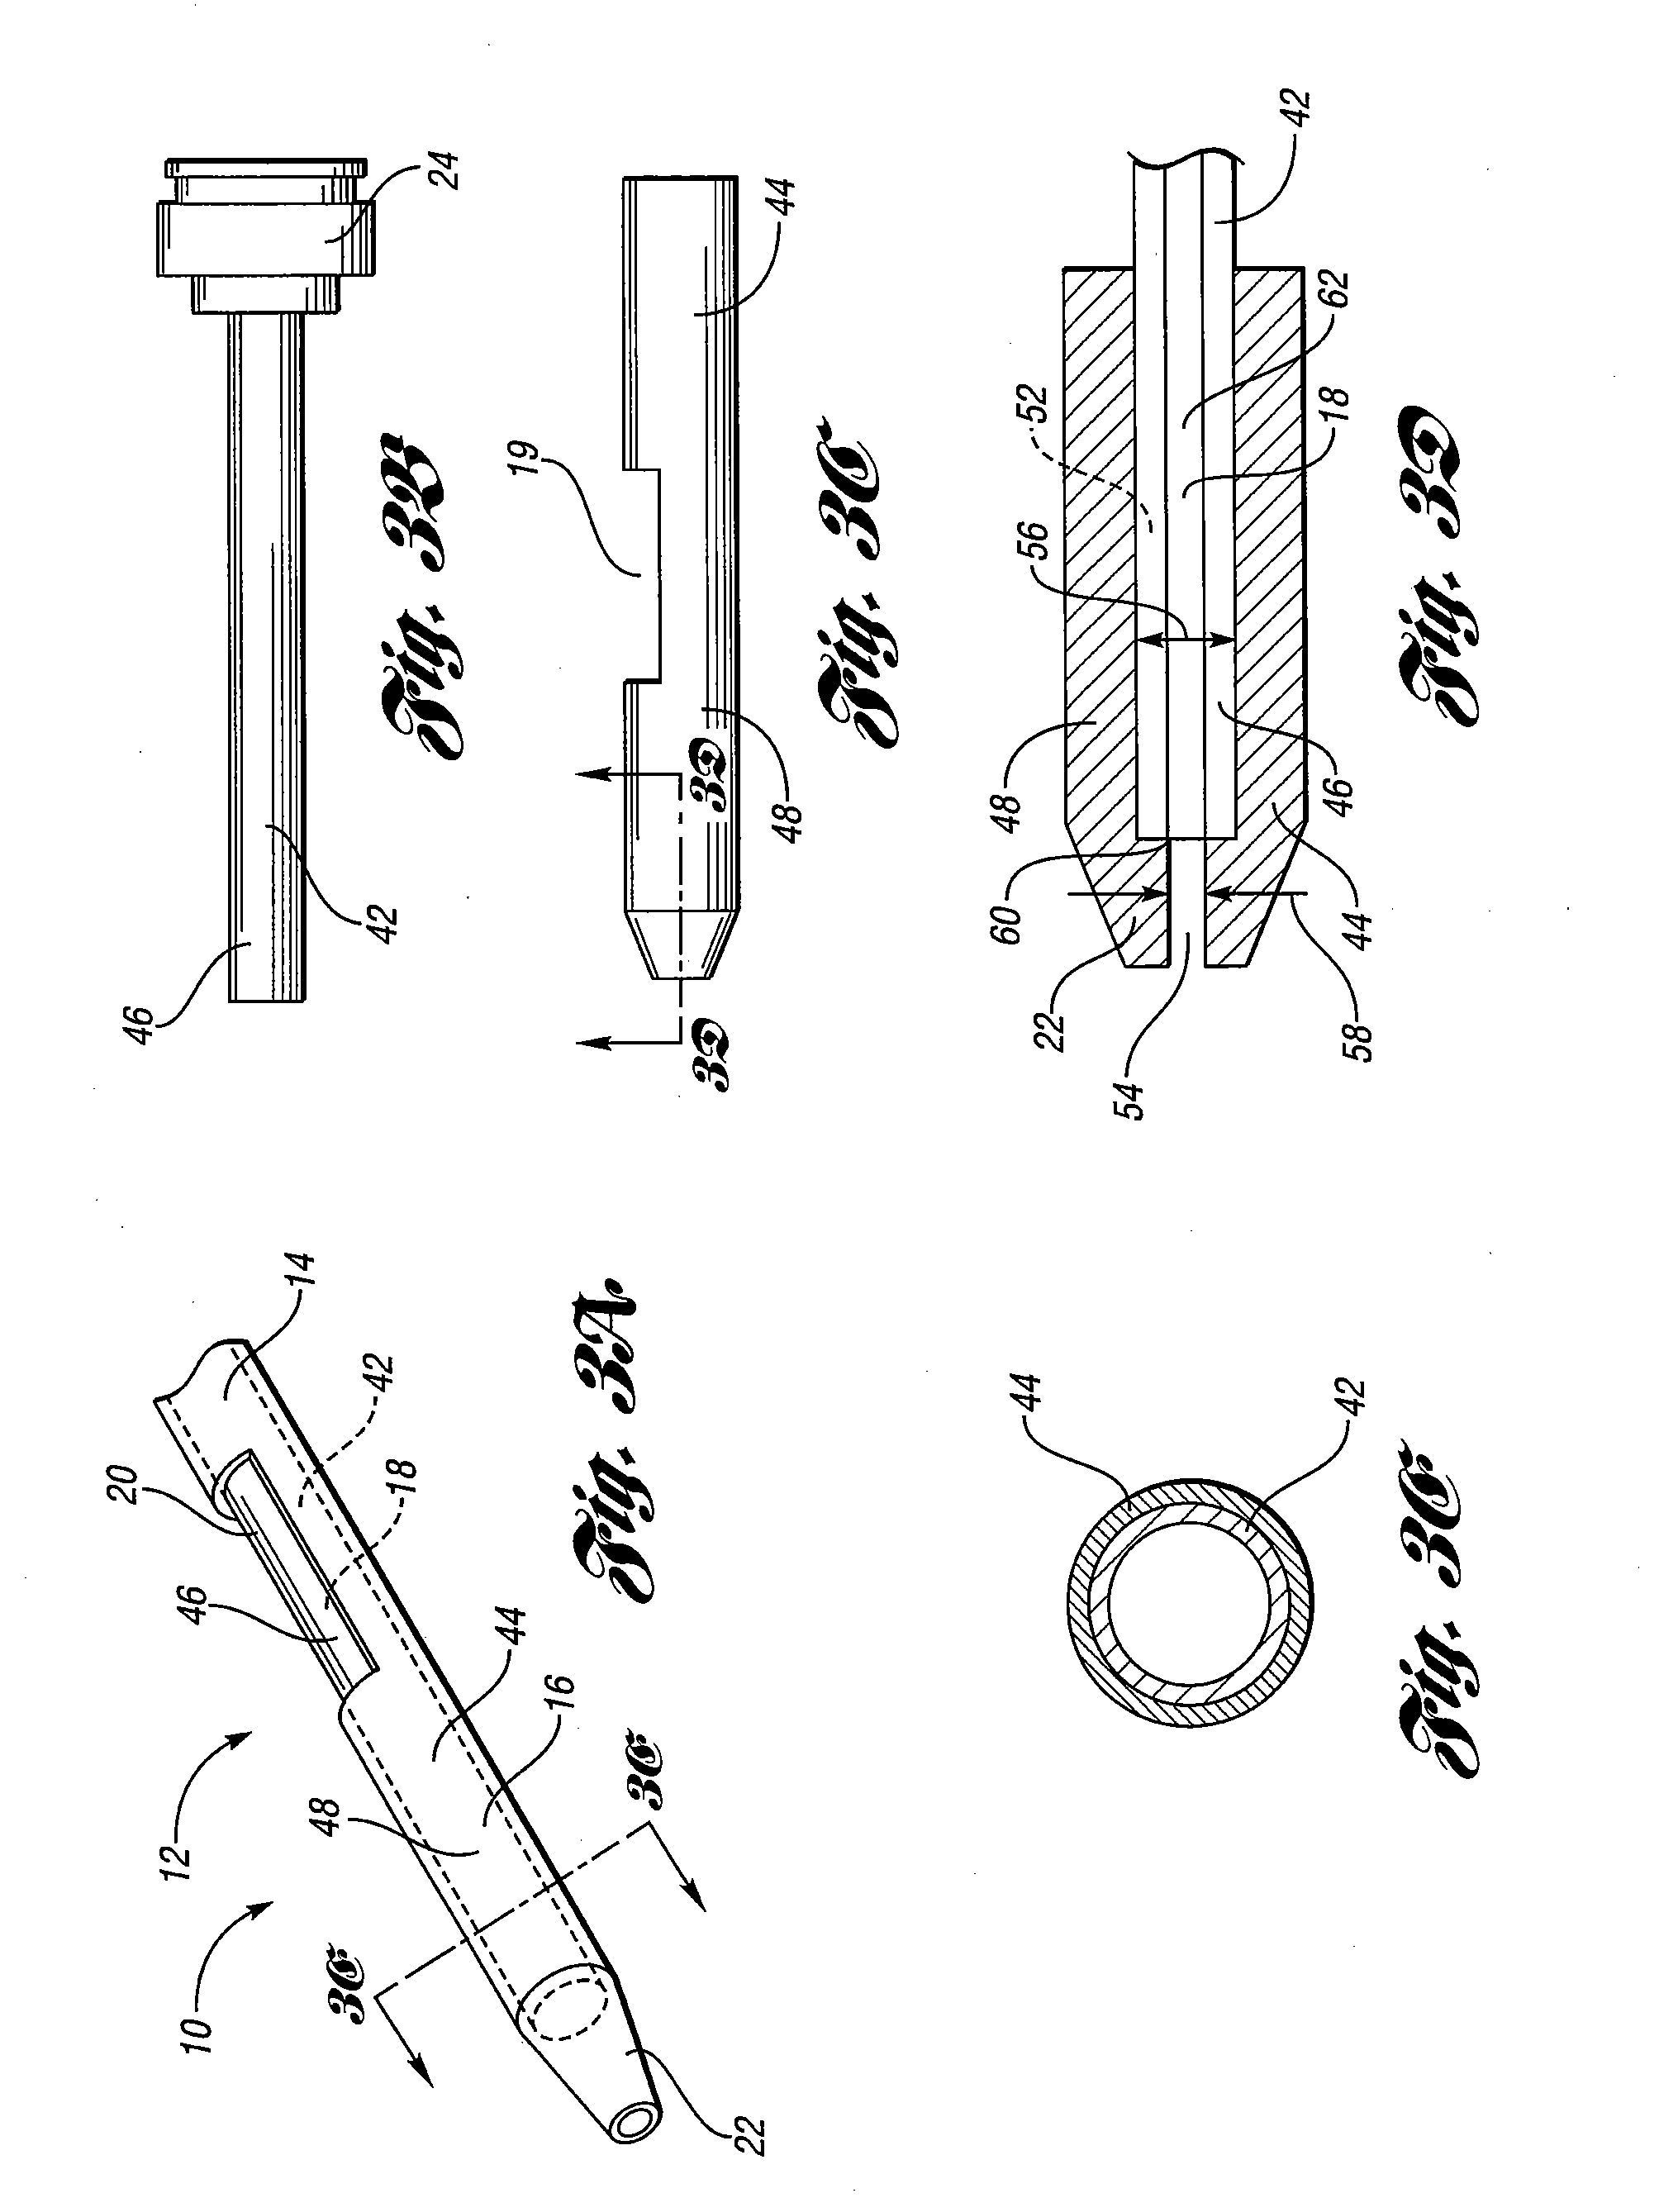 Loading device for delivering an embolization coil into a microcatheter